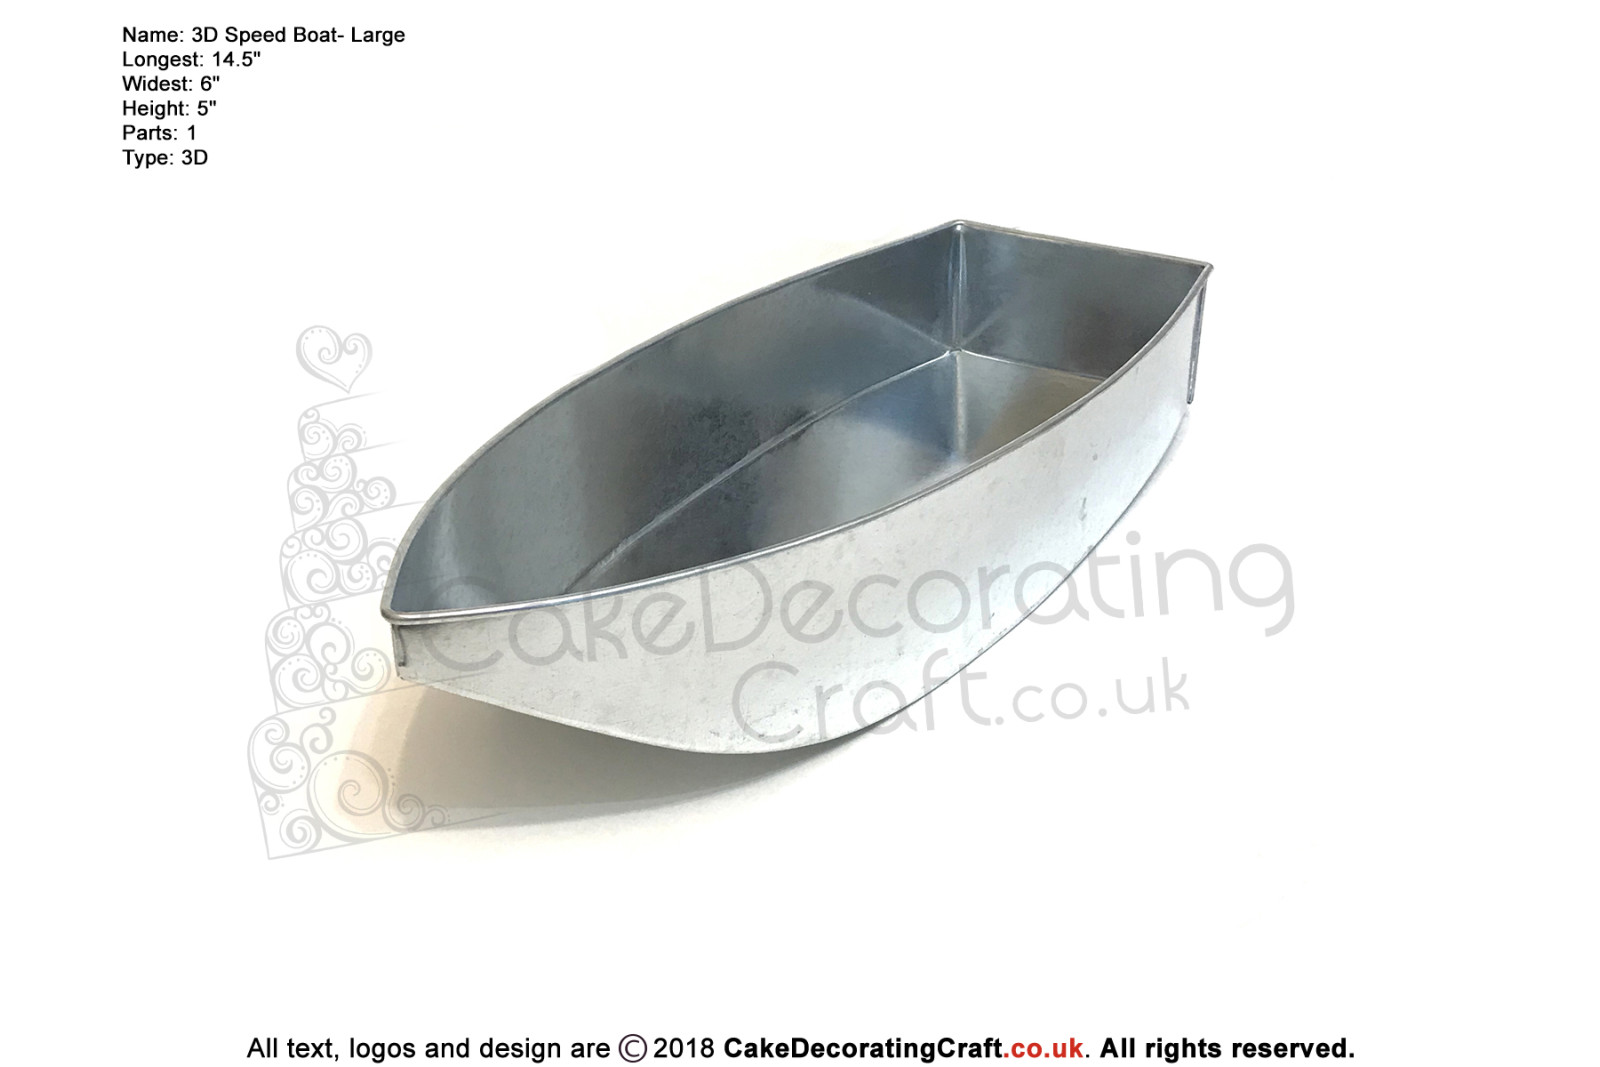 3D Speed Boat Large | Novelty Shape | Cake Baking Tins and Pans | 5" Deep